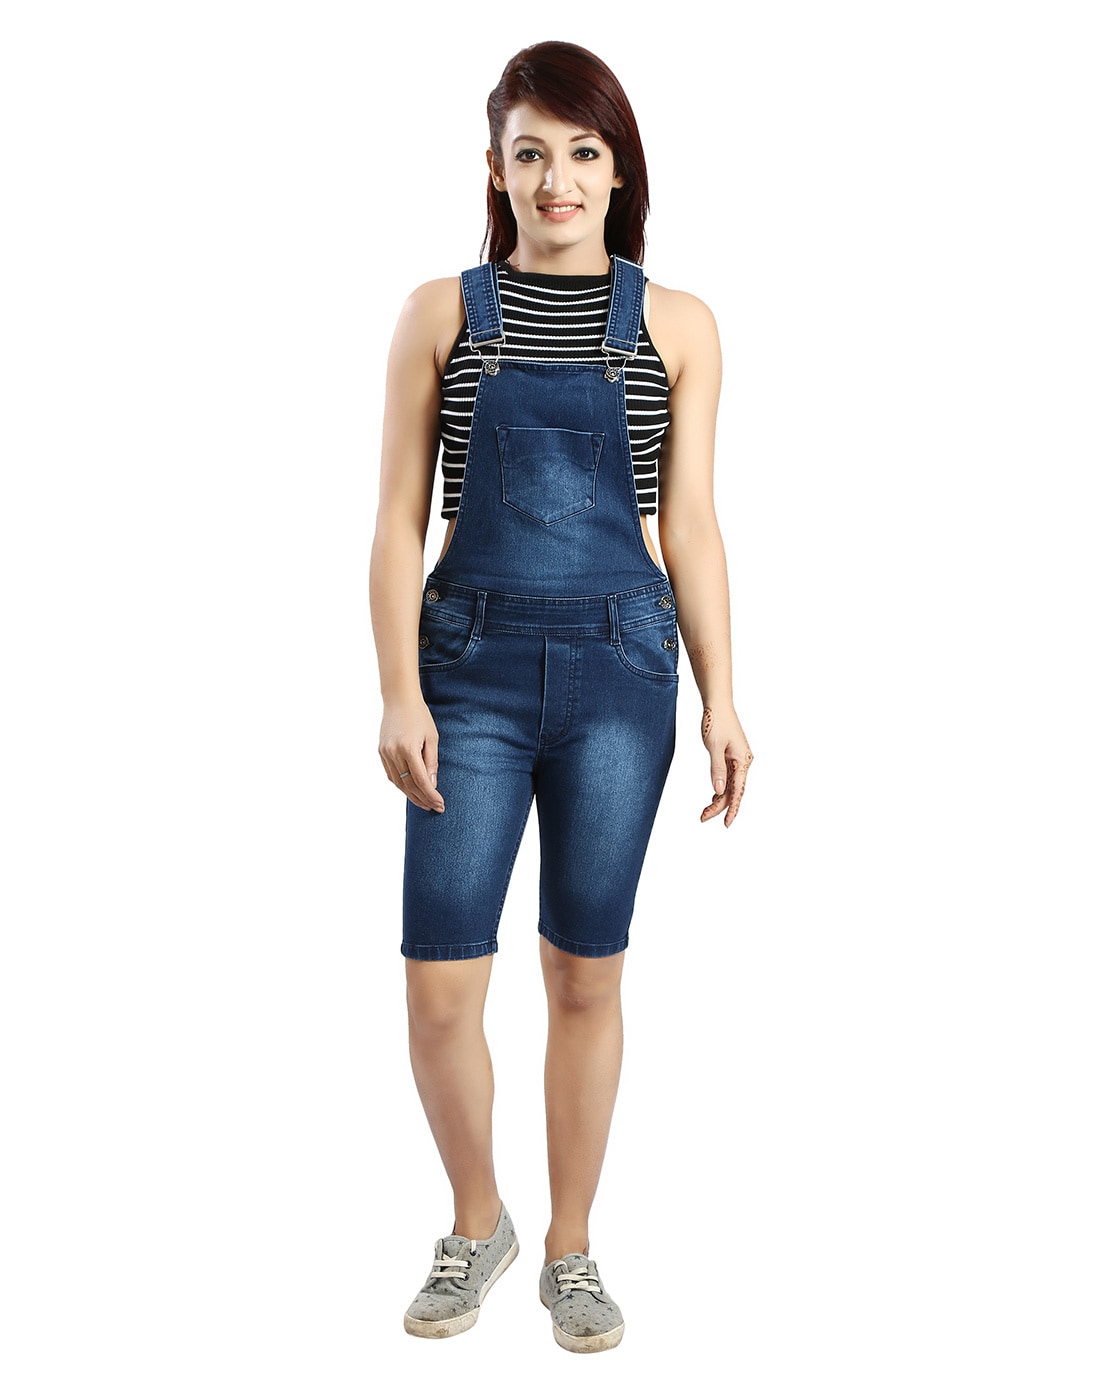 Buy Blue Jumpsuits &Playsuits for Women by SHOWOFF Online | Ajio.com